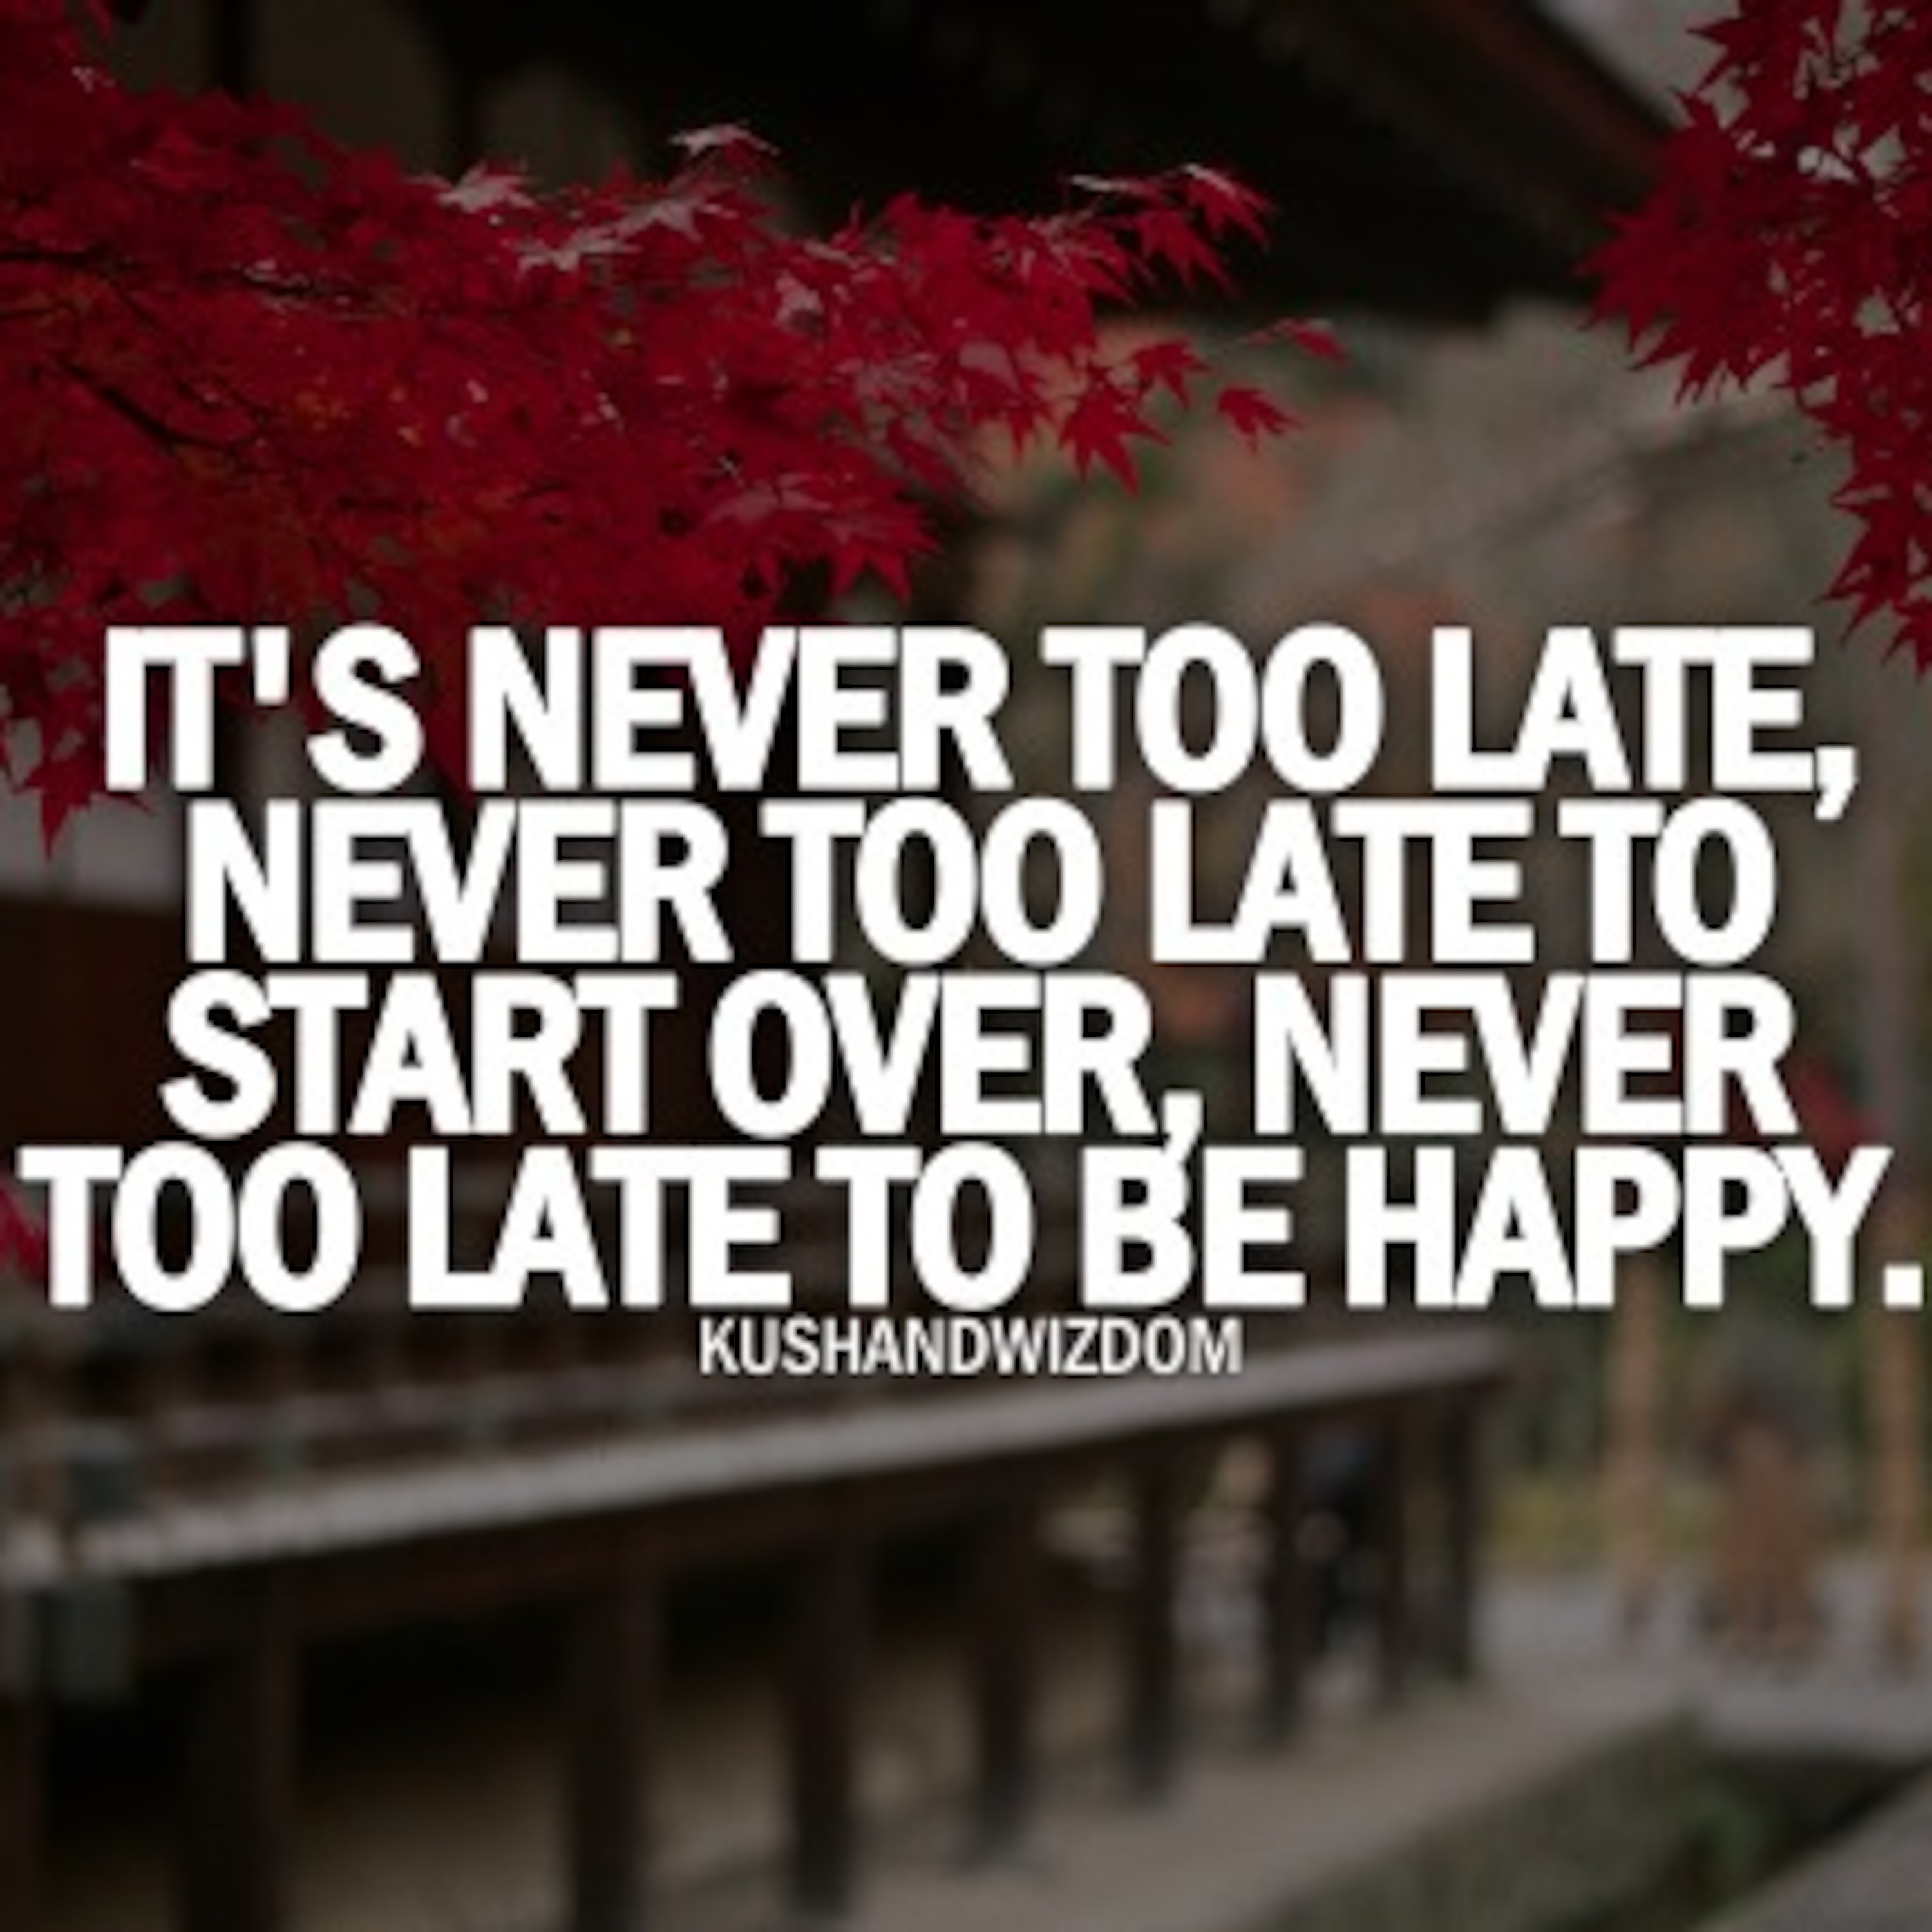 Quotes about being too late. Never late to be Happy. It's never too late to start over. Never to late.